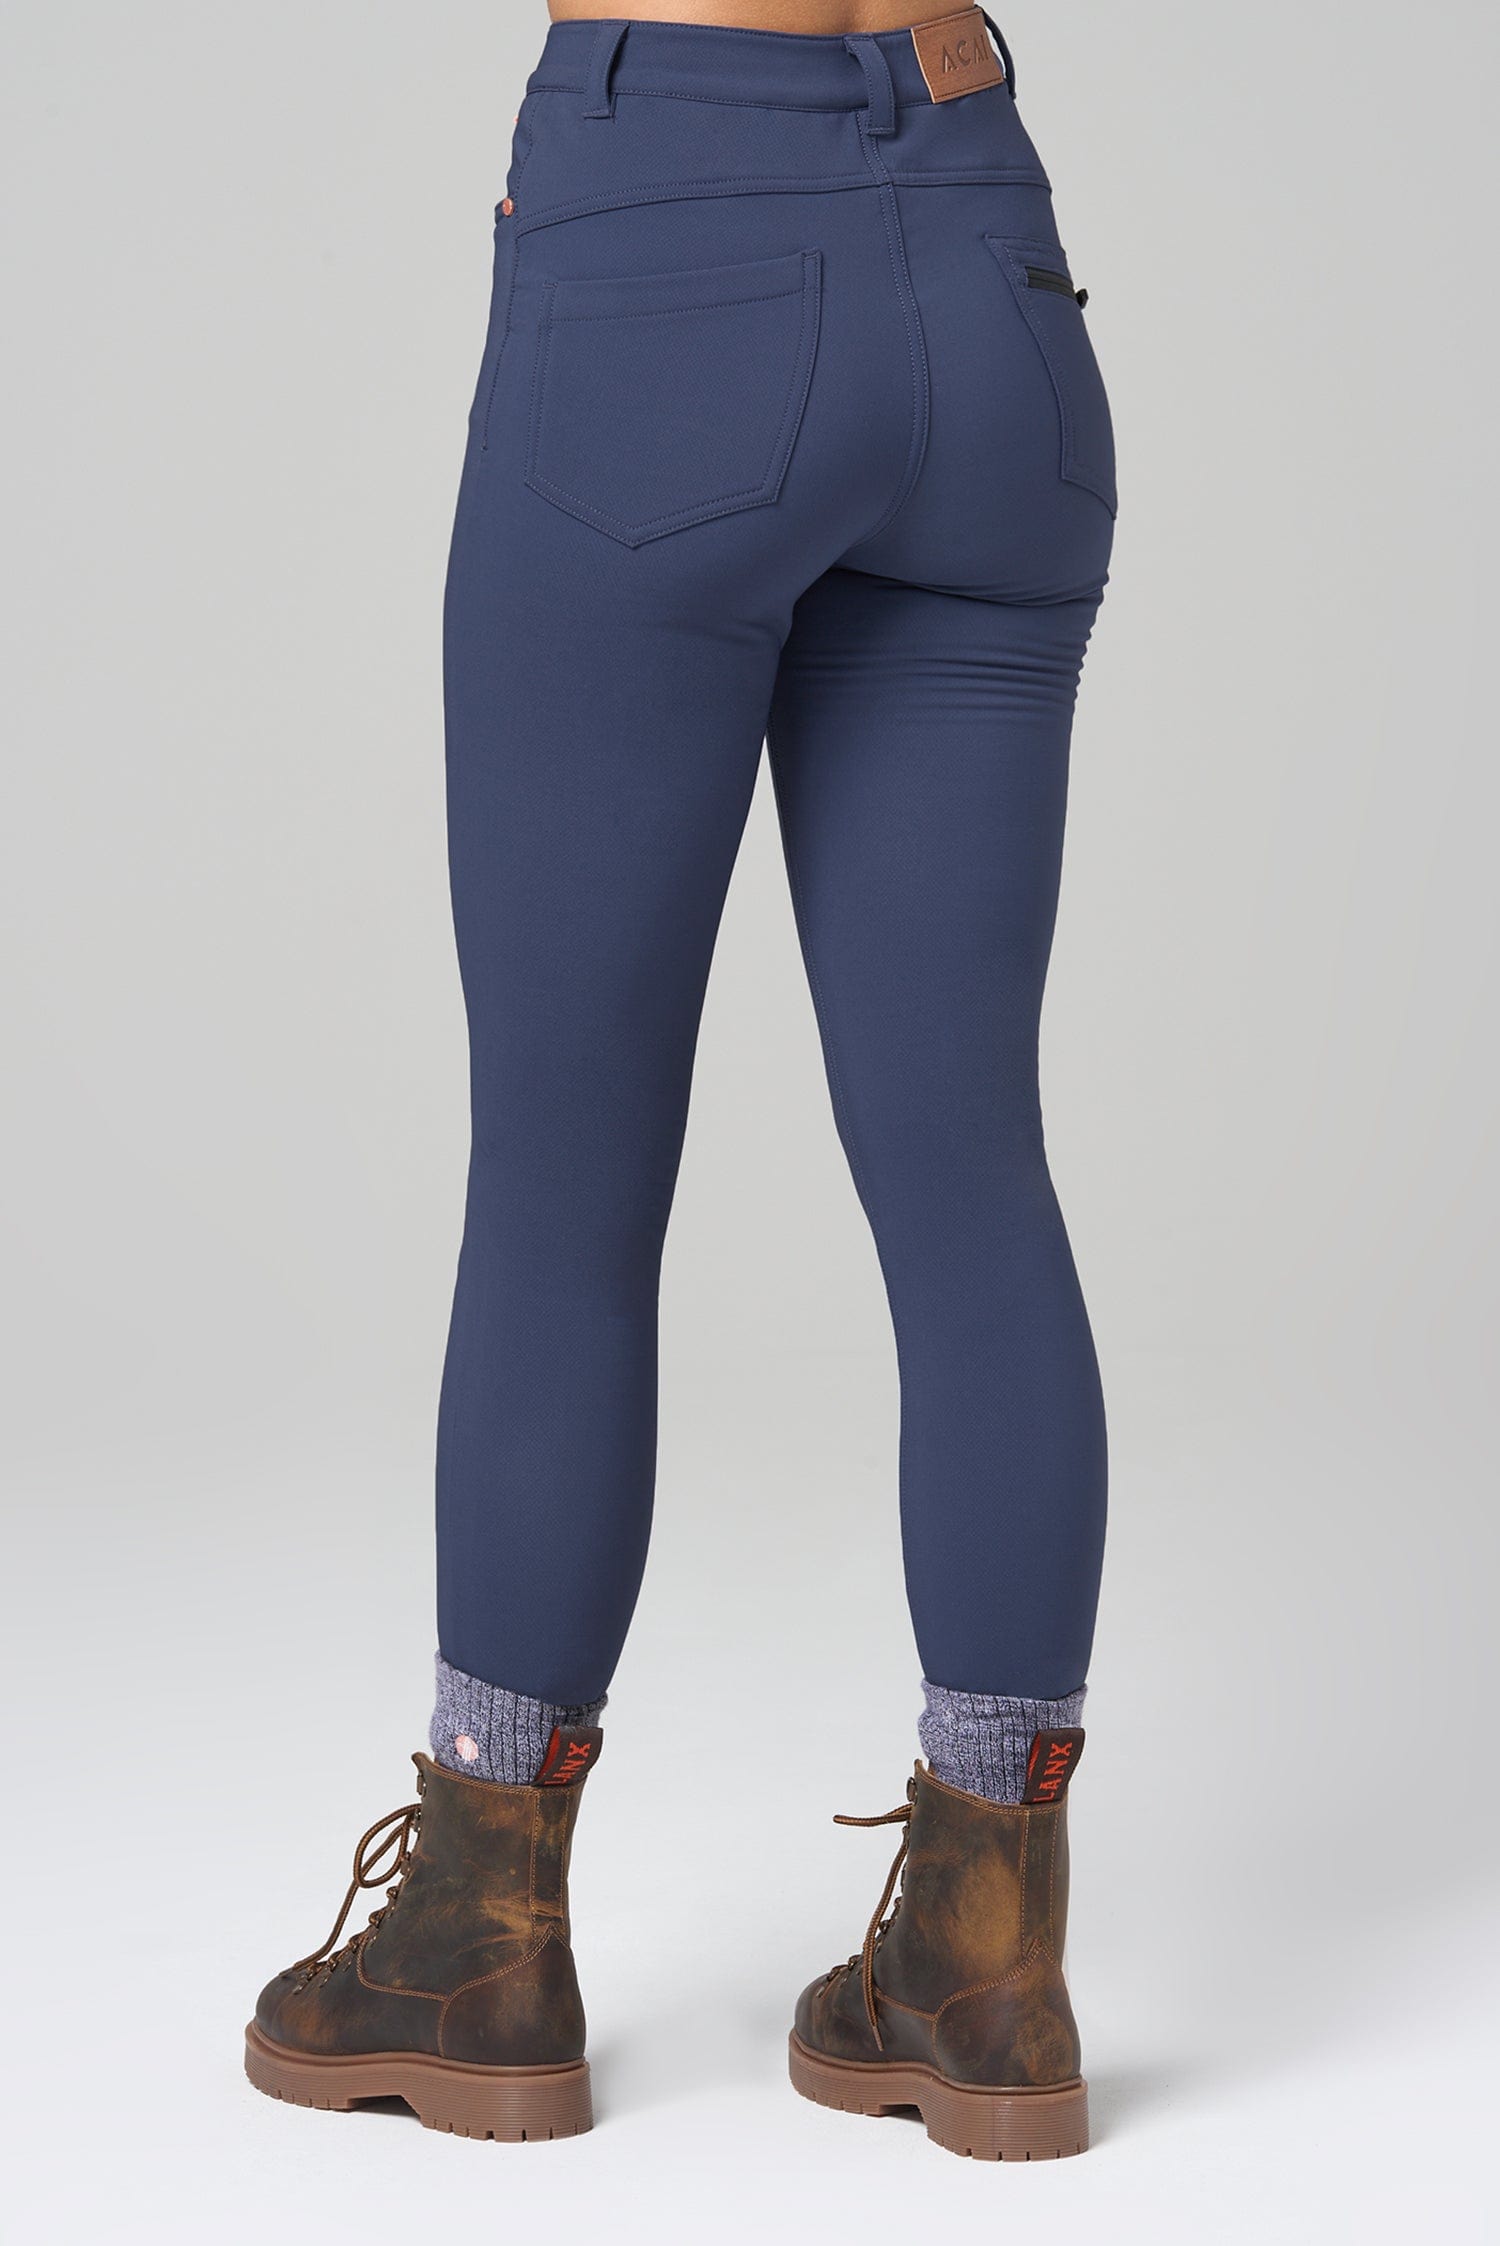 MAX Stretch Skinny Outdoor Trousers - Steel Blue Trousers  